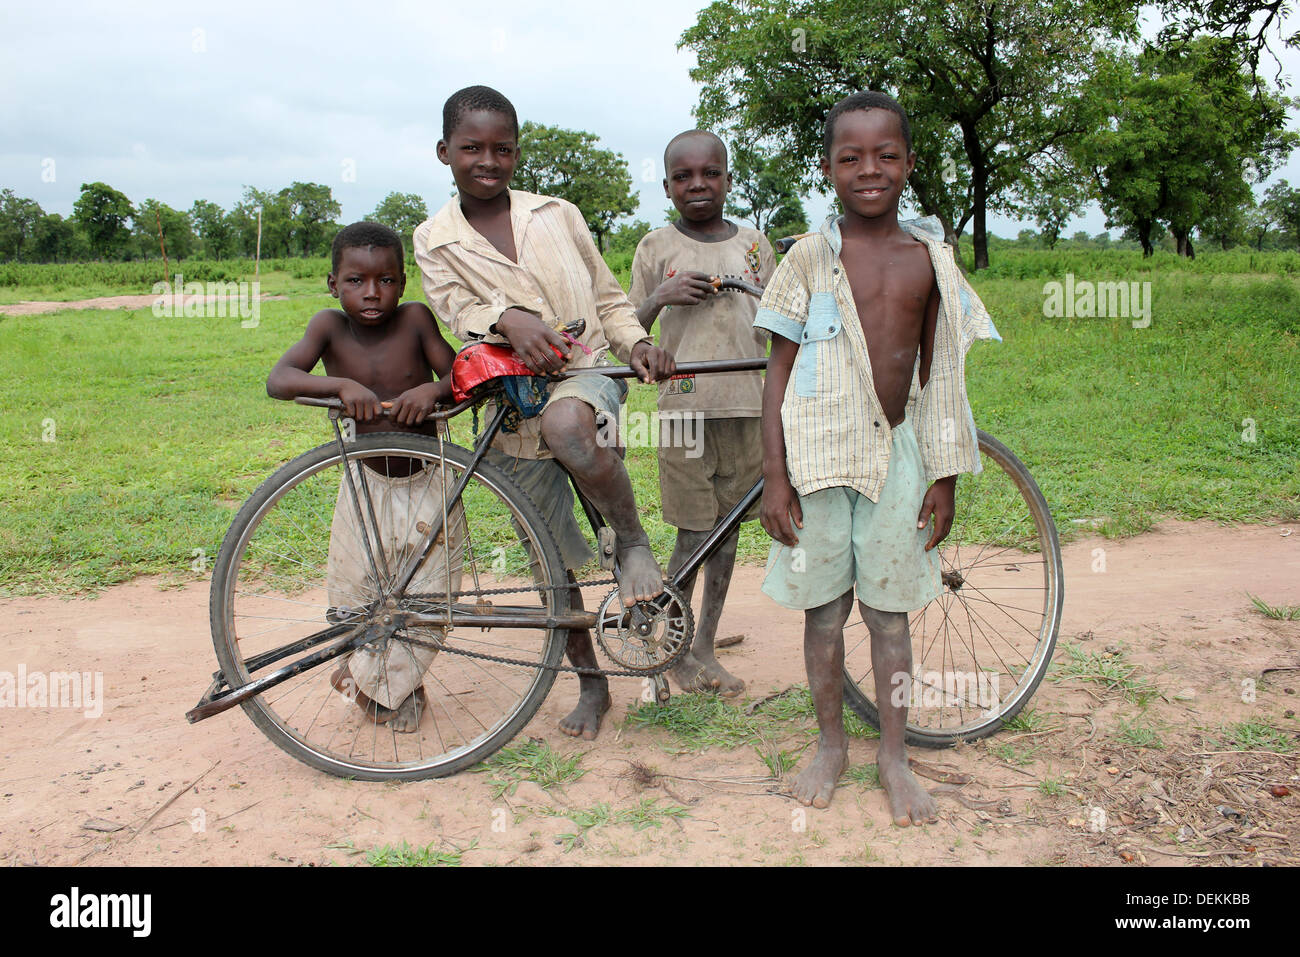 Ghanaian Boys Of The Gonja Ethnic Group With Bicycle Stock Photo